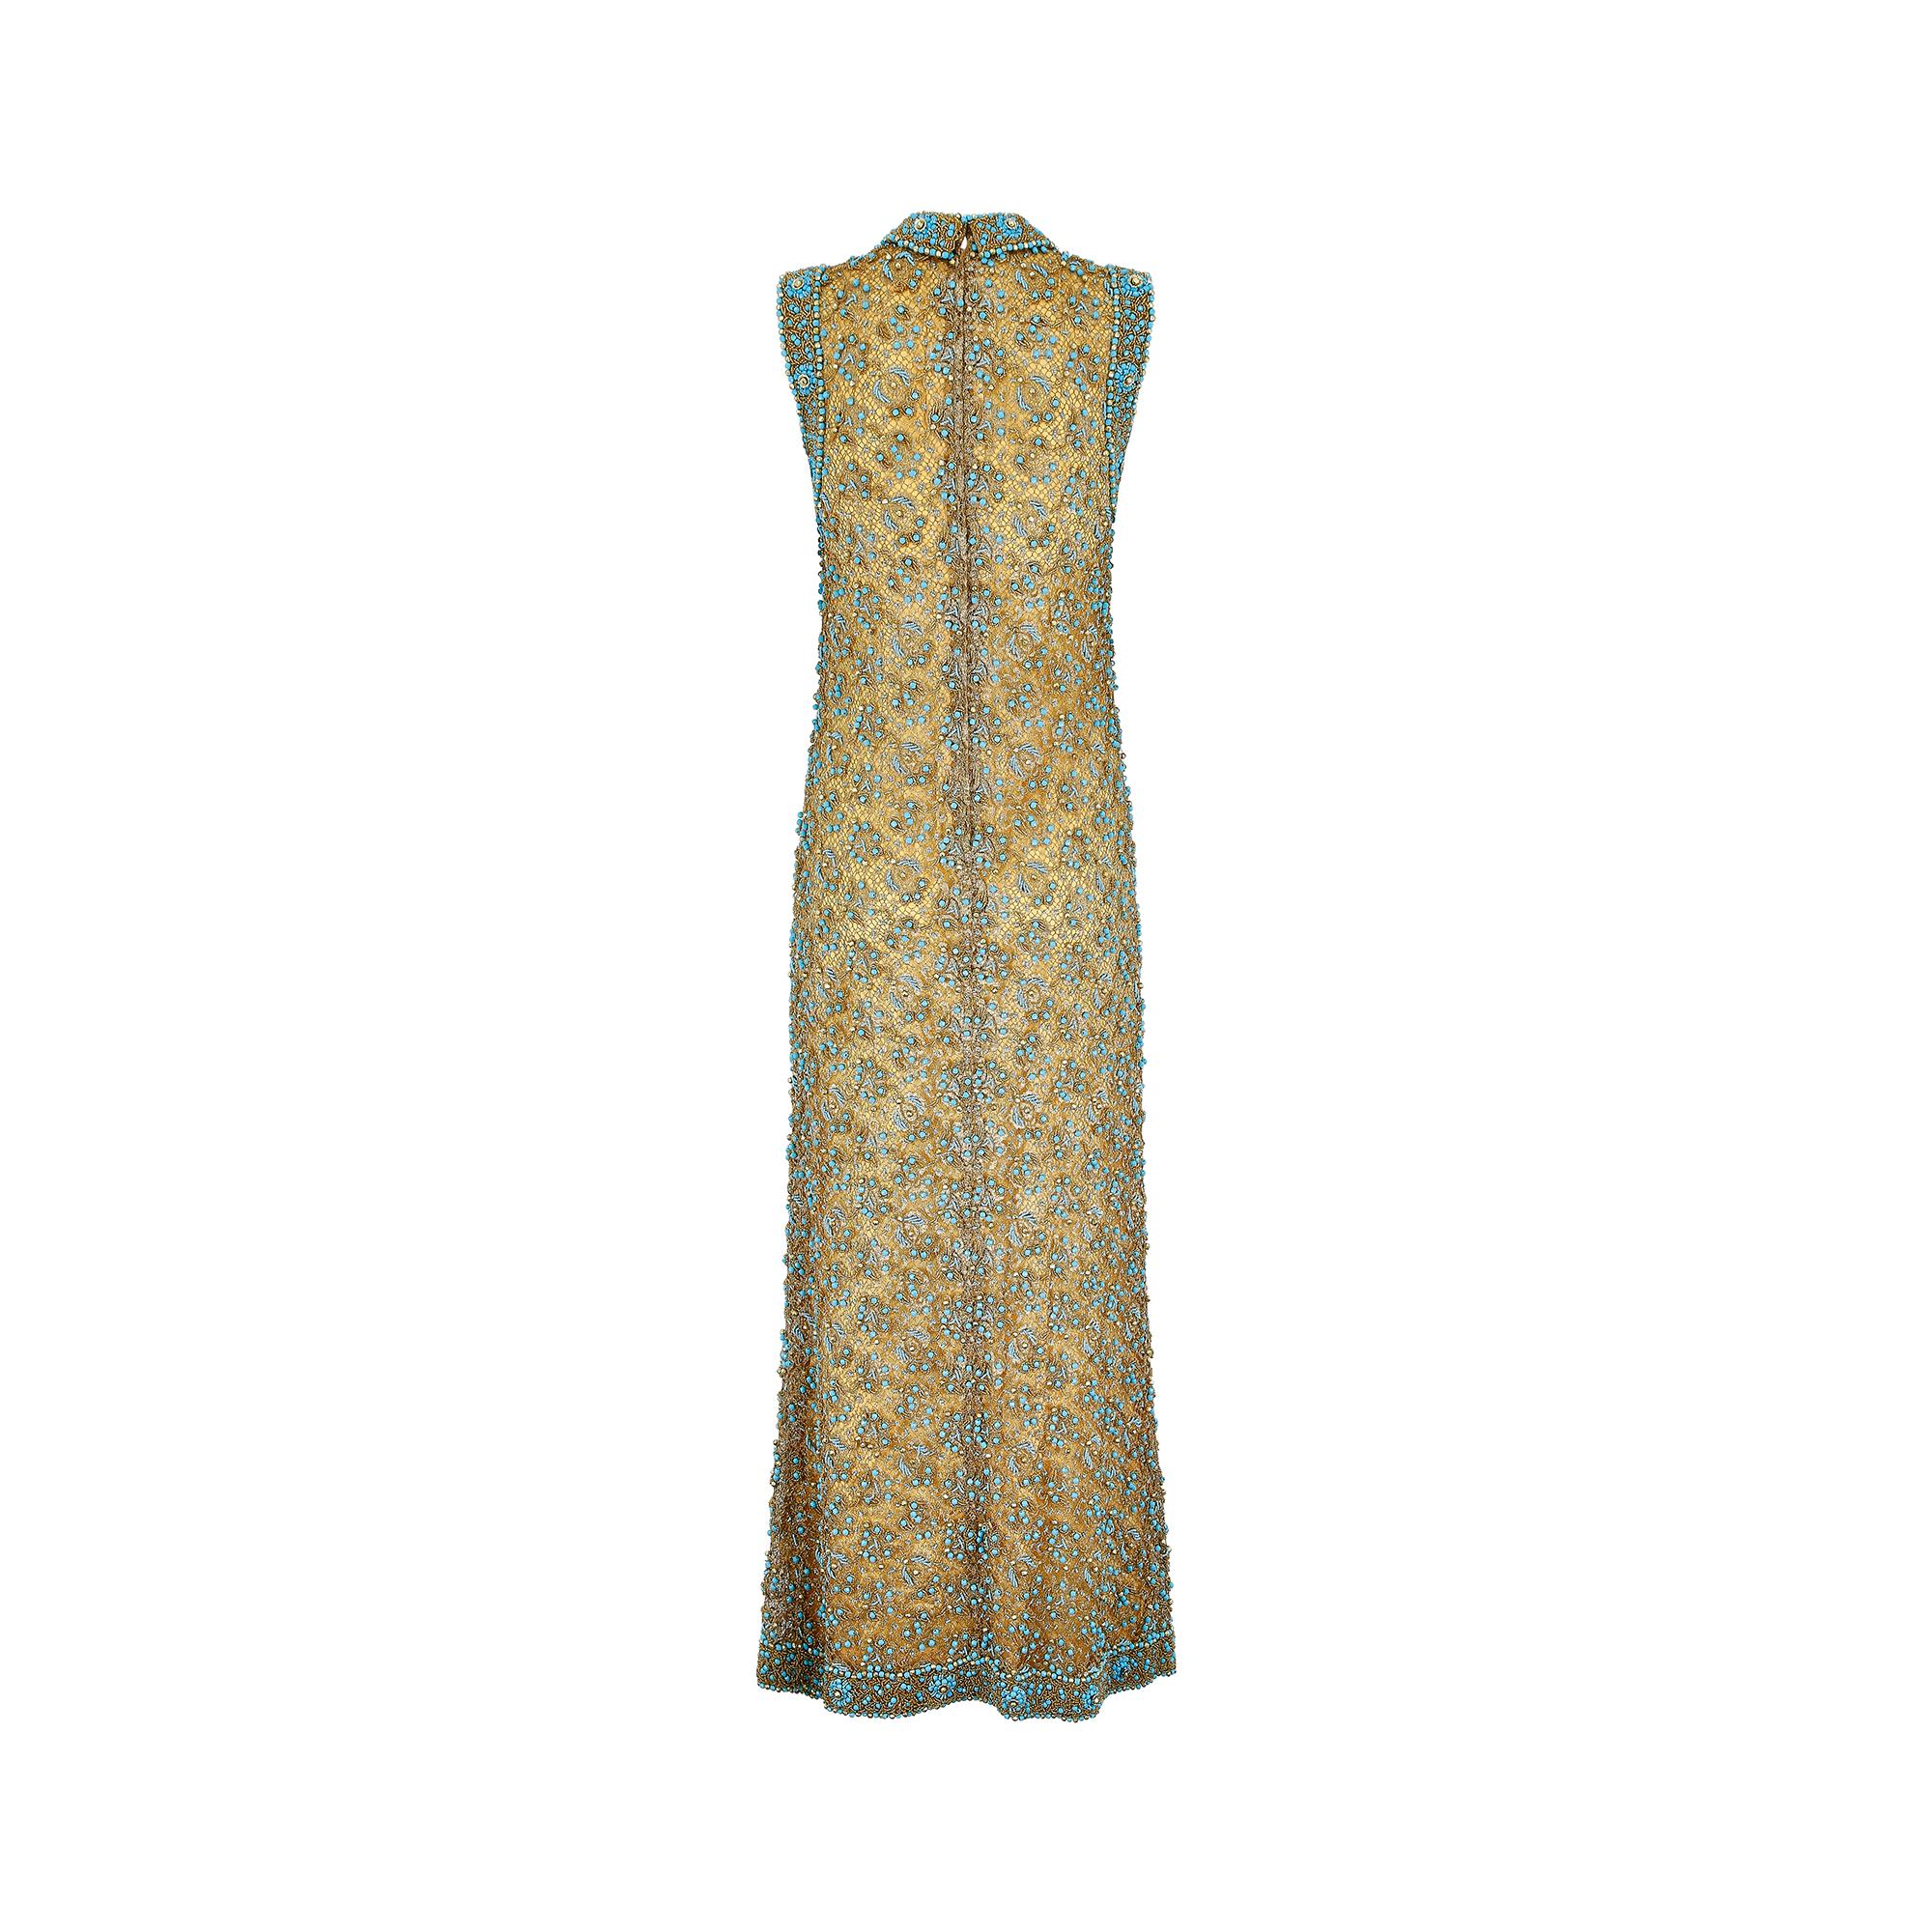 Women's 1960s Doreen Lok Gold and Turquoise Beaded Maxi Dress  For Sale